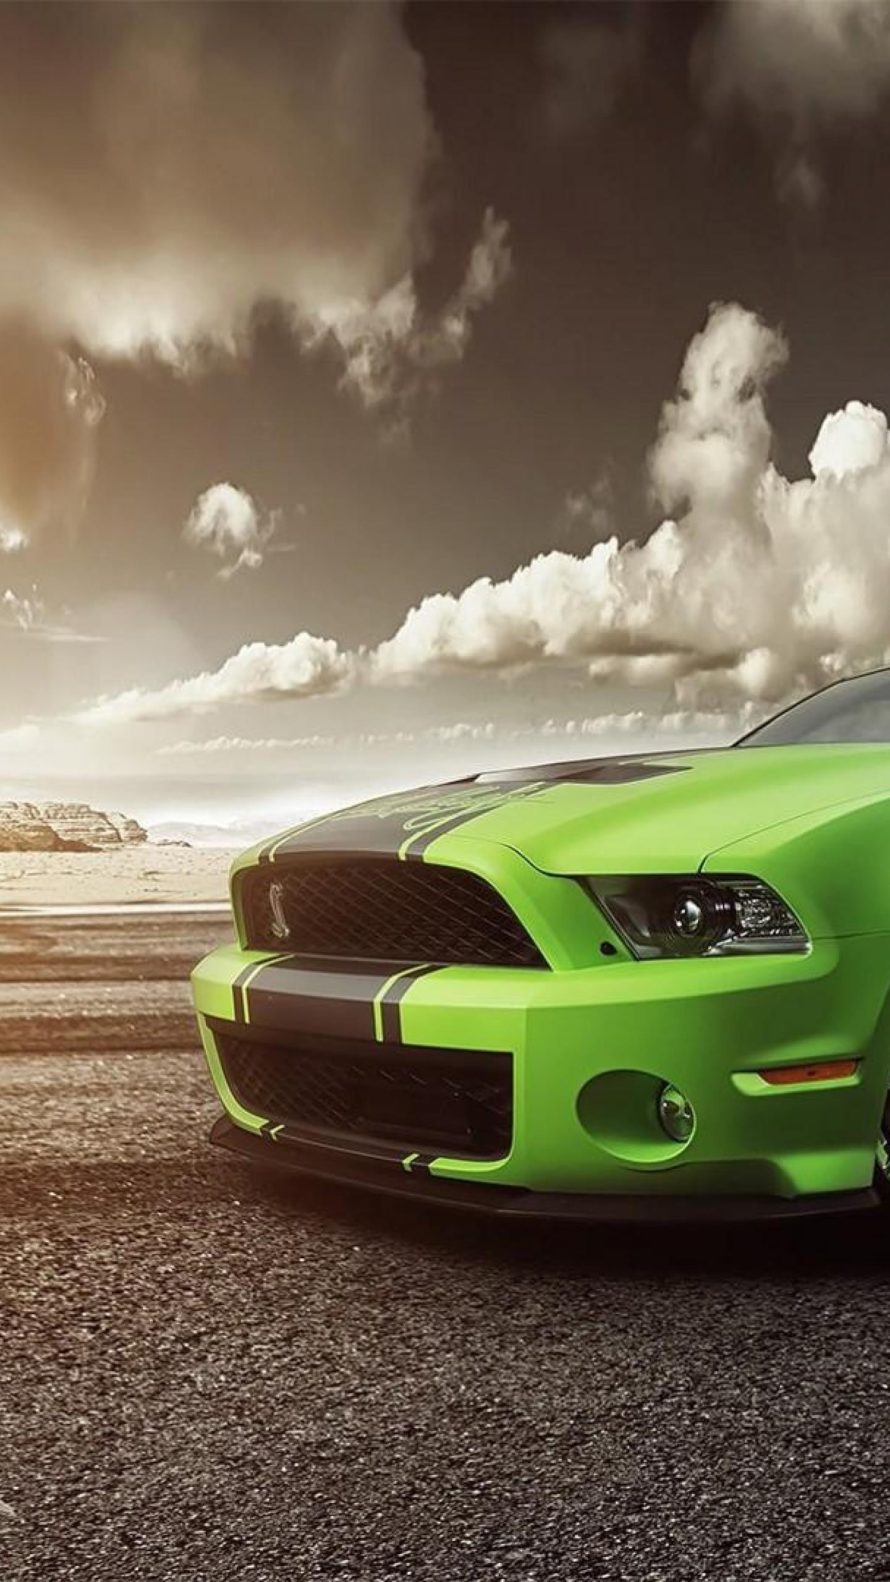 Ford Mustang Gt HD Wallpaper For Mobile